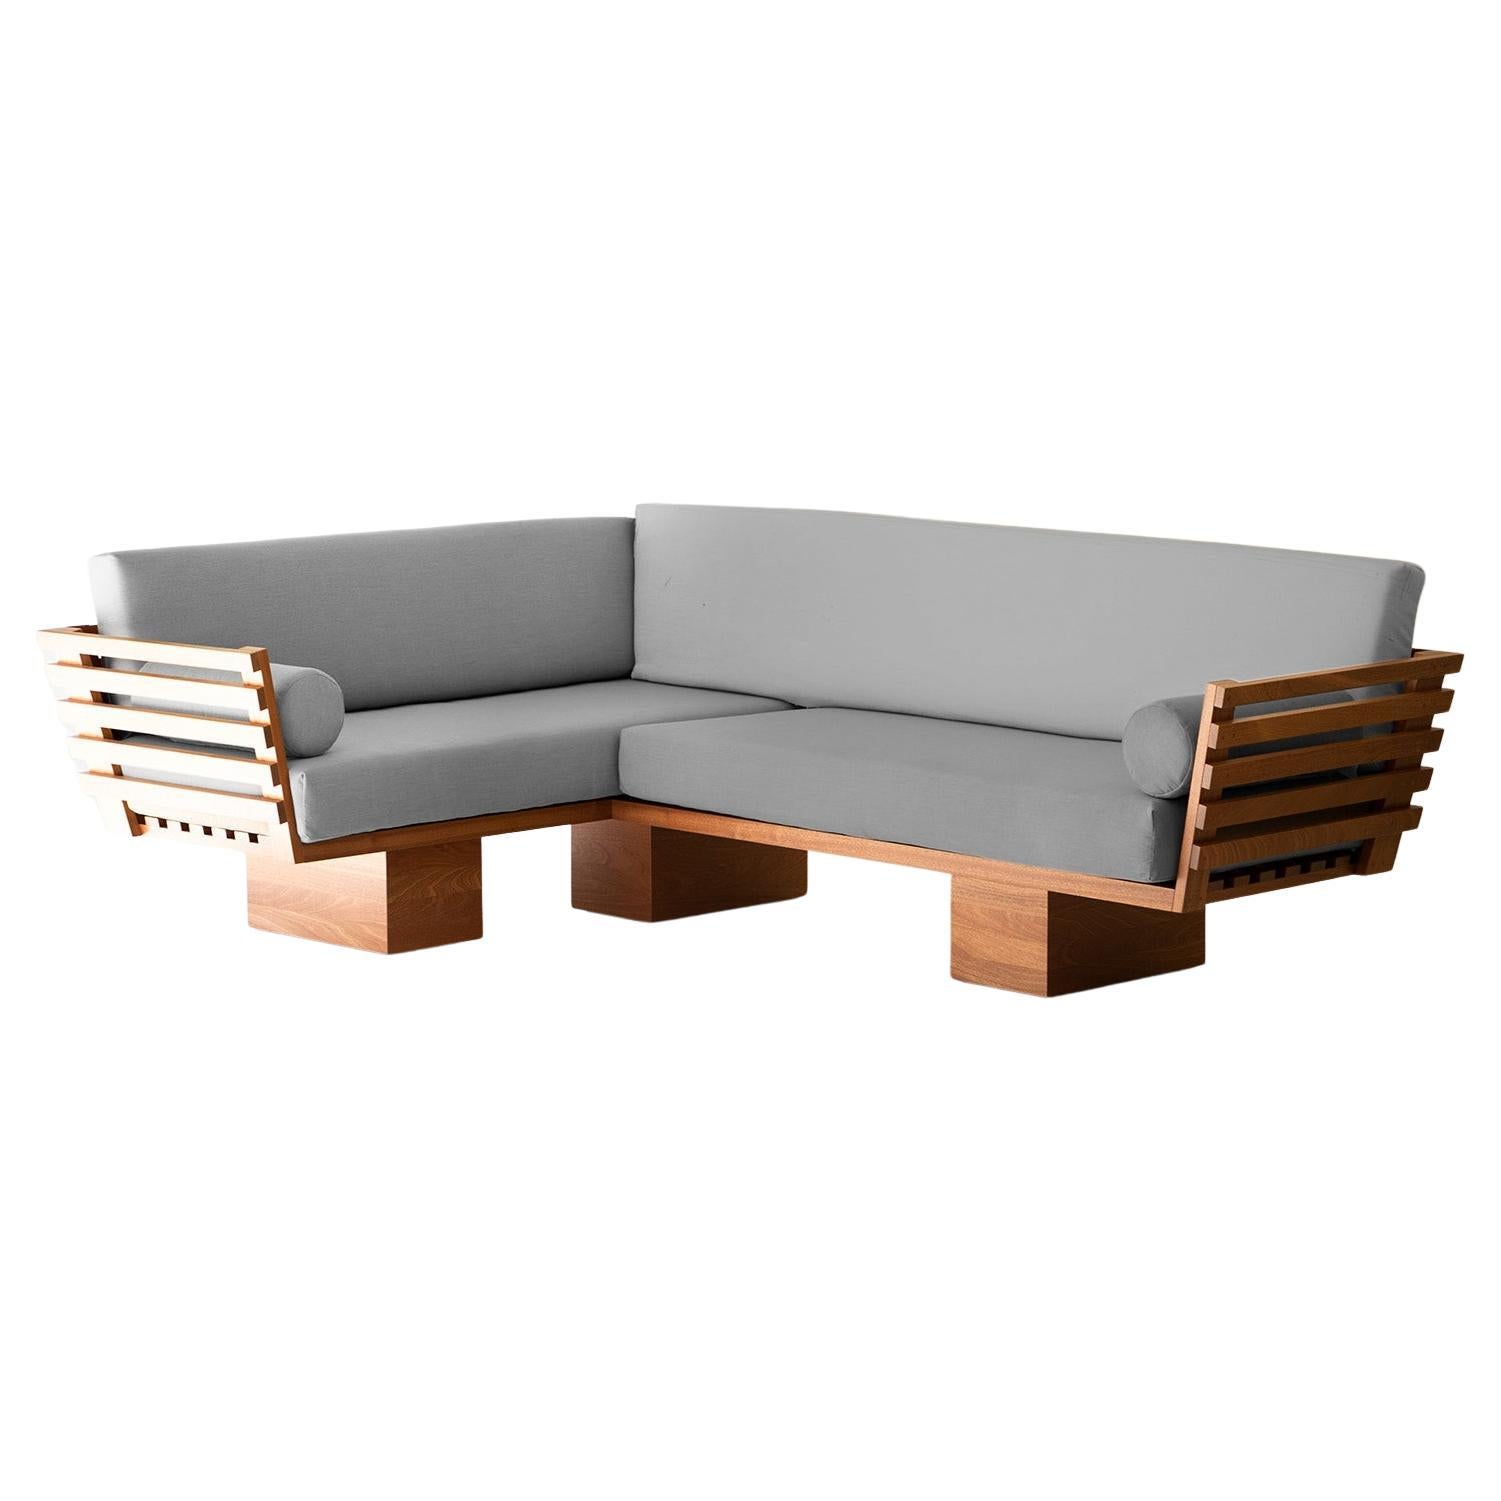 Suelo Slatted Outdoor Sectional For Sale